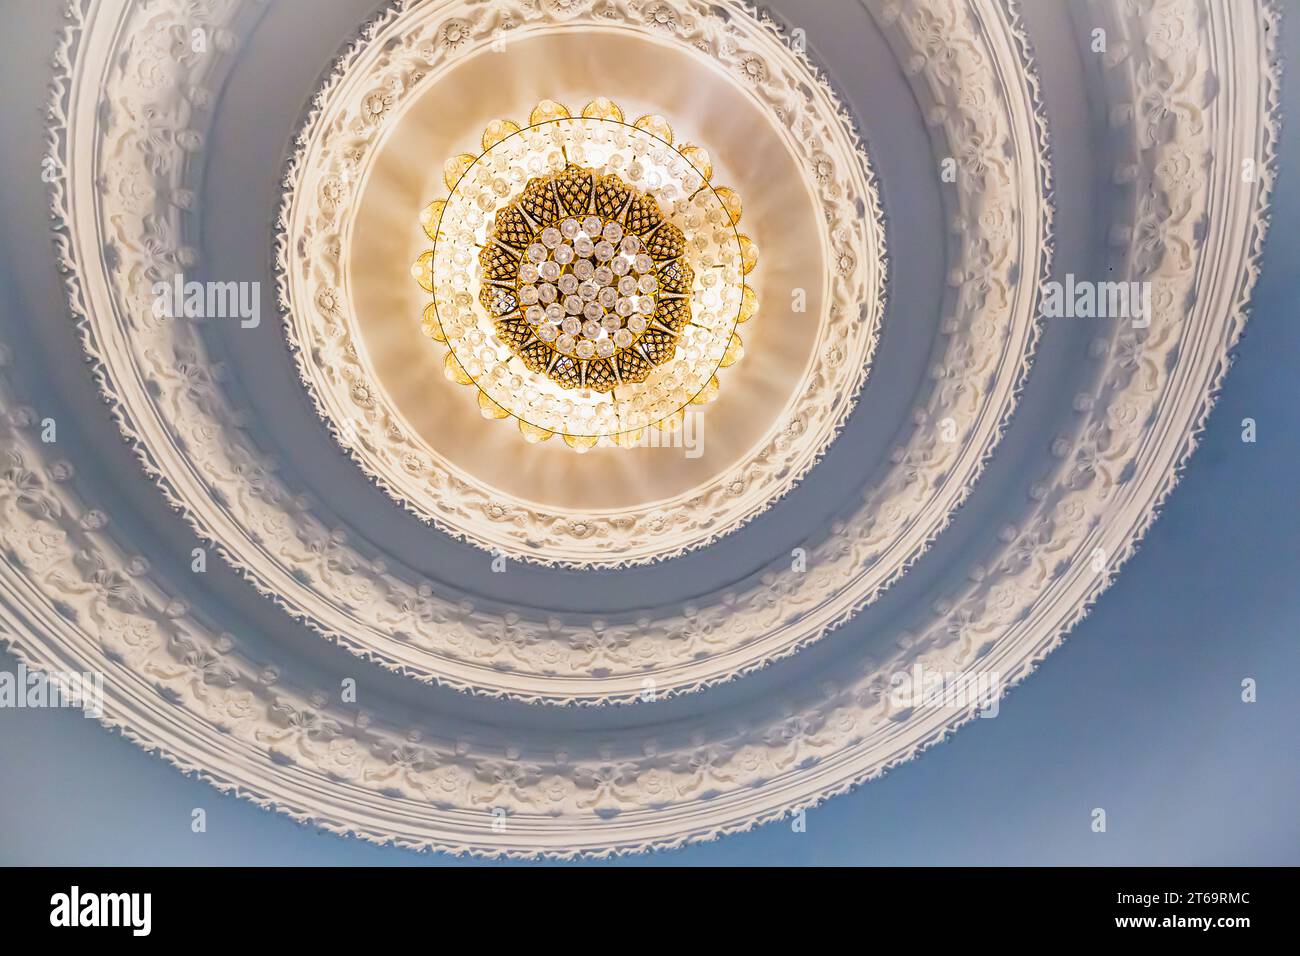 Ornate recessed light fixtures in the ceiling of the Guan Yin (Goddess of Mercy) statue at Wat Huay Pla Kang Temple in Chiang Rai province of Thailand Stock Photo